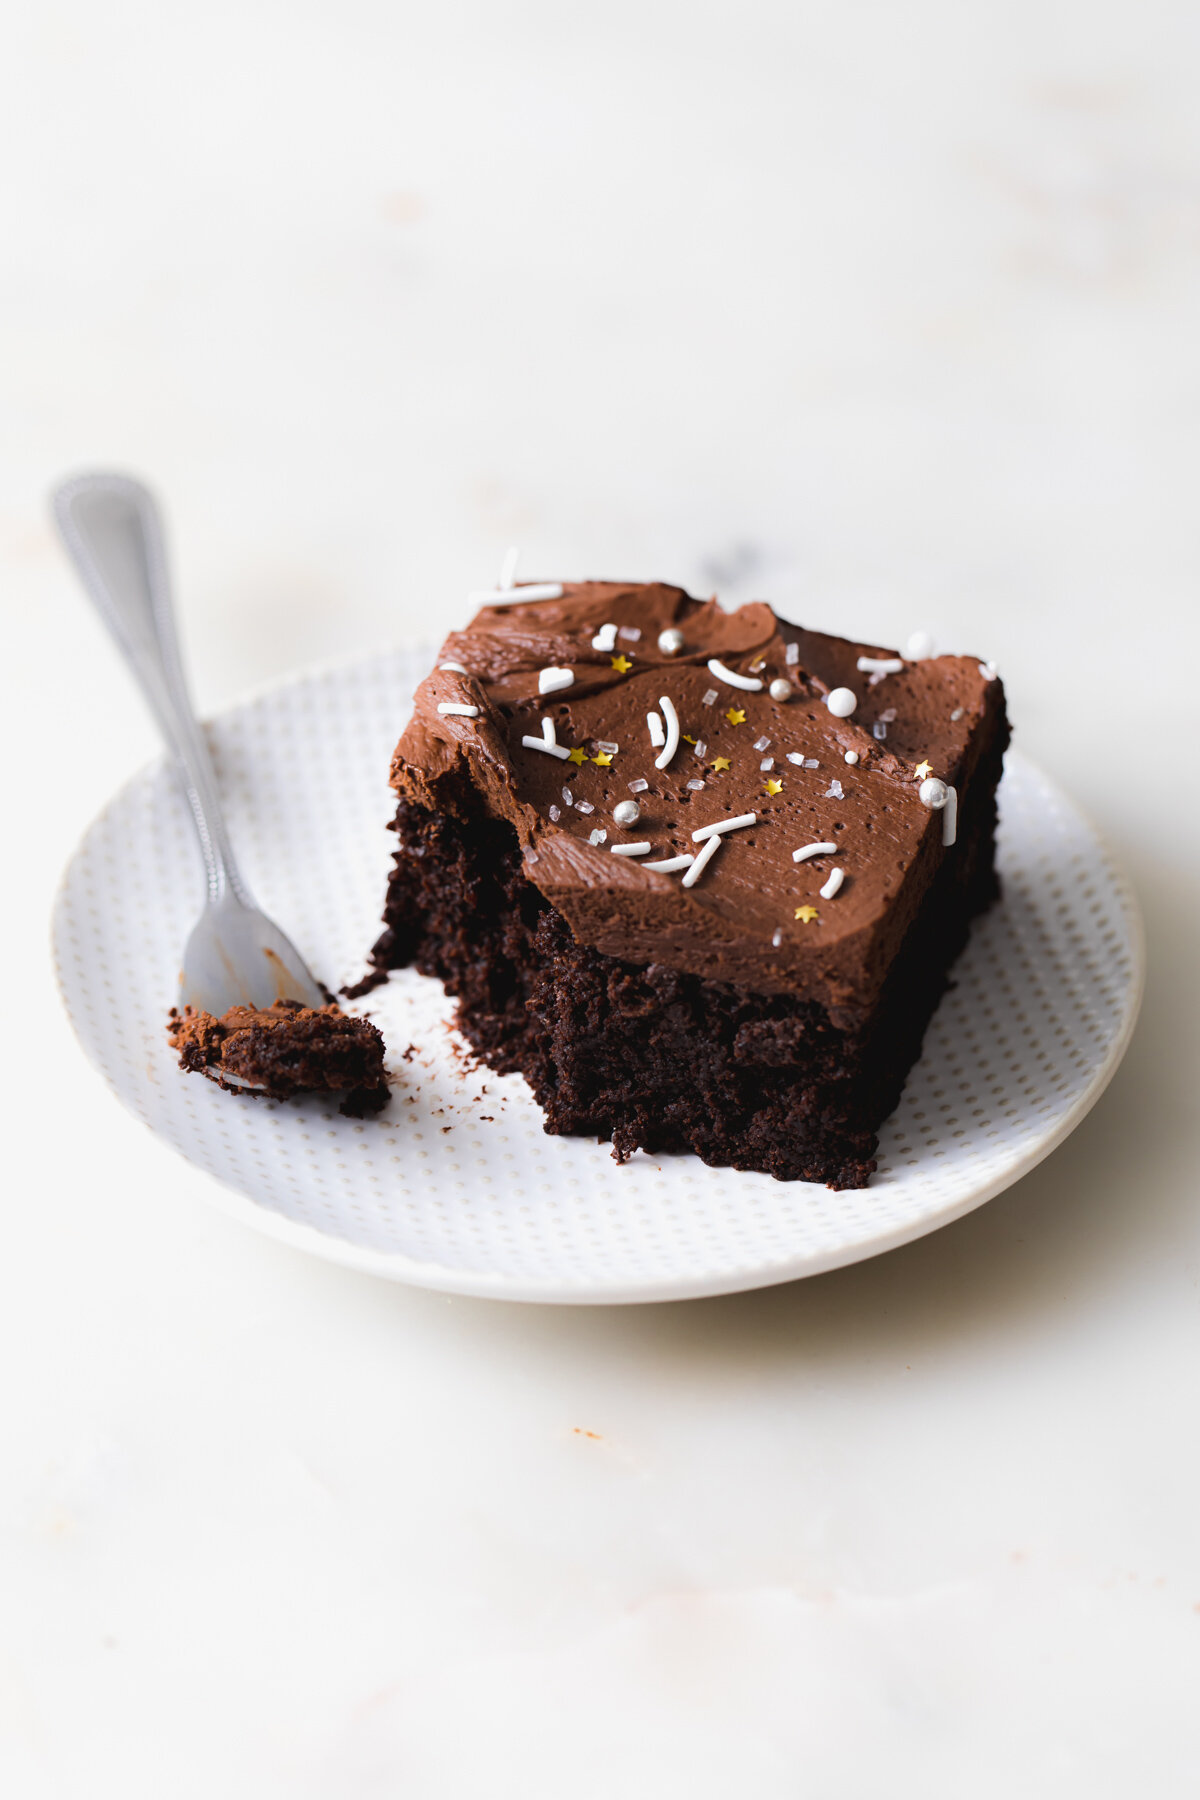 Rye Chocolate Snacking Cake with whipped ganache frosting